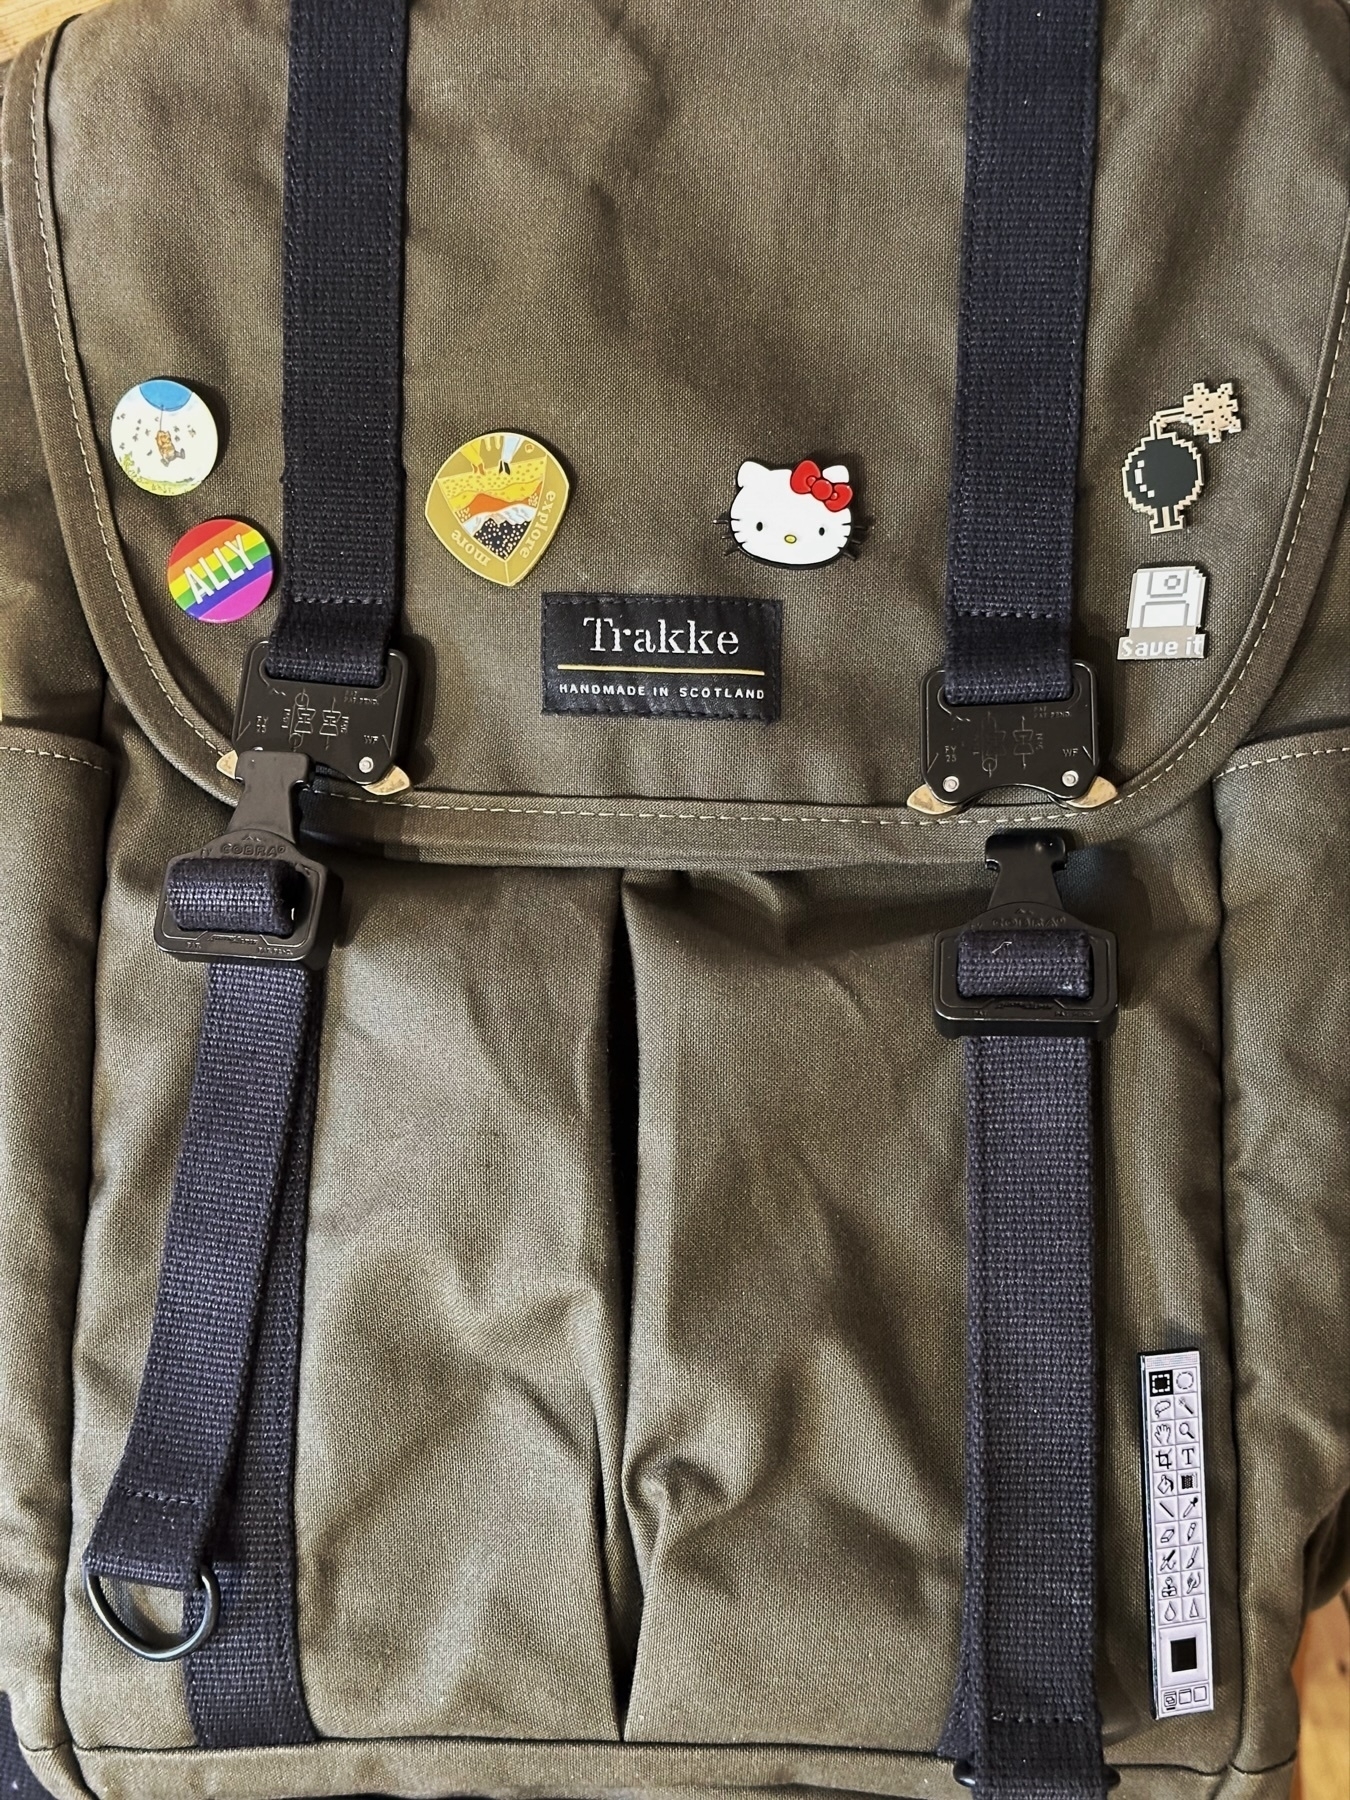 A backpack with several pins and badges attached to its outer flap, including a Hello Kitty"